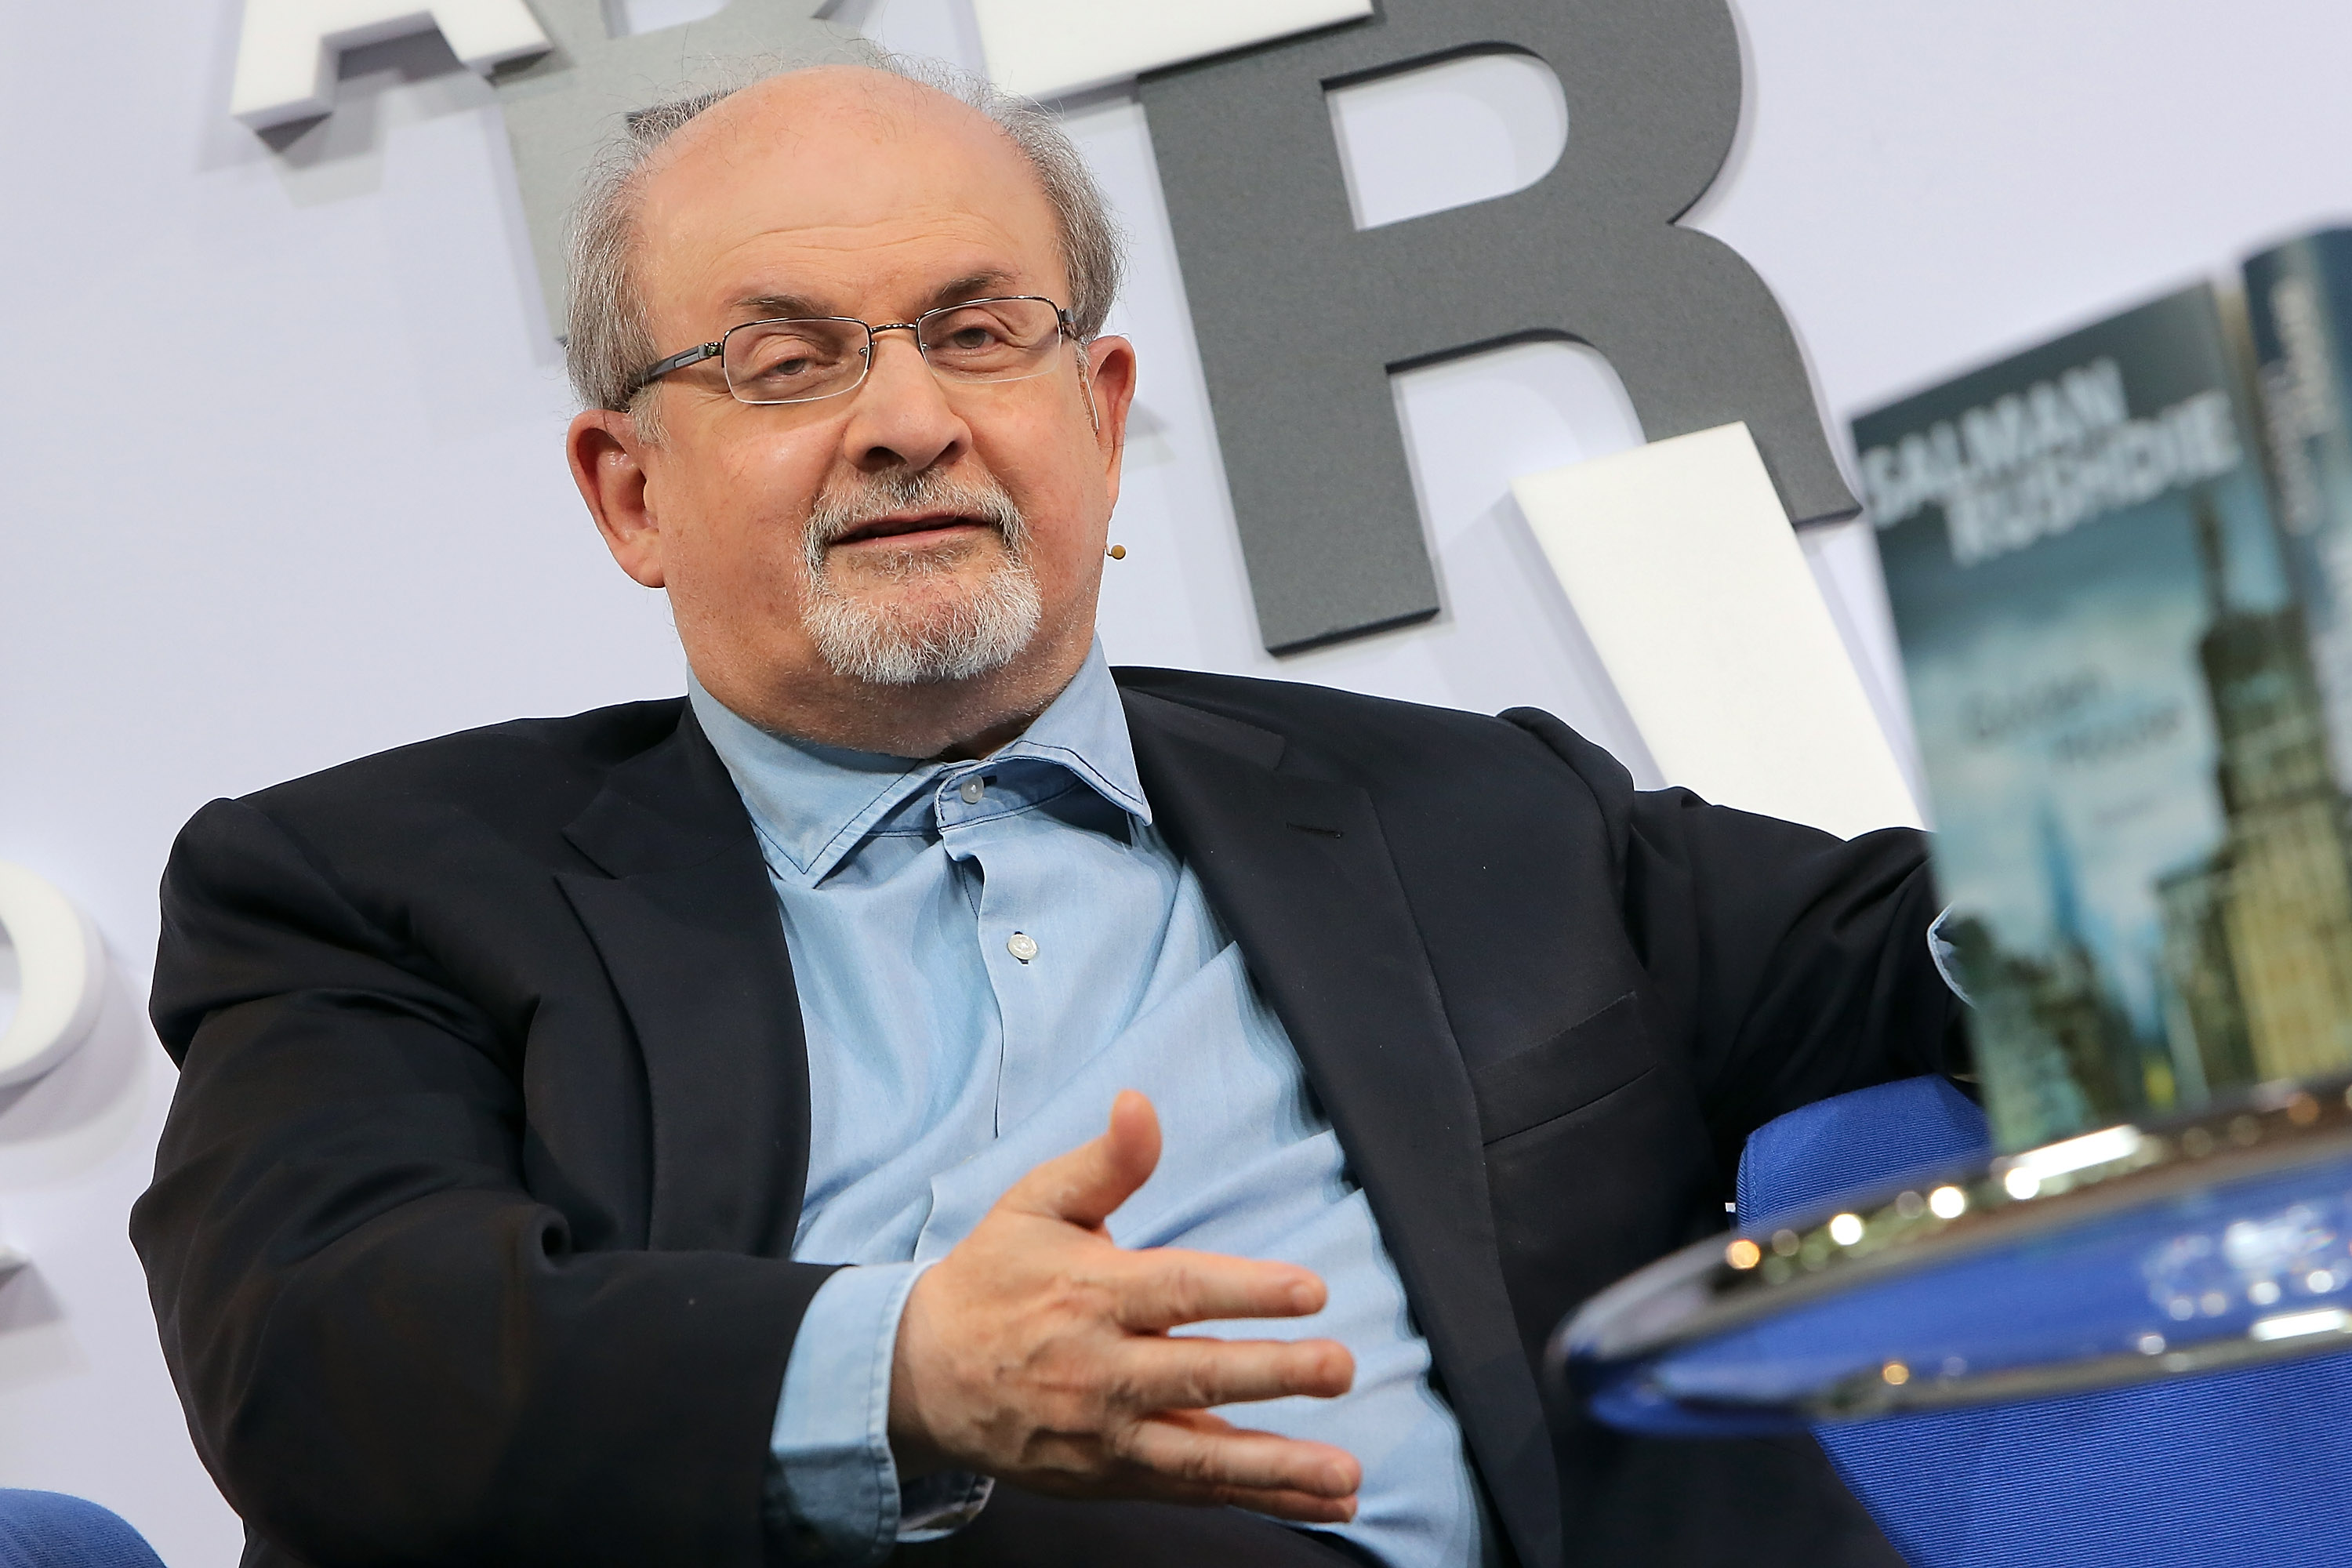 Author Salman Rushdie at the Blue Sofa at the 2017 Frankfurt Book Fair (Frankfurter Buchmesse) on October 12, 2017 in Frankfurt am Main, Germany. Image: Hannelore Foerster / Getty Images